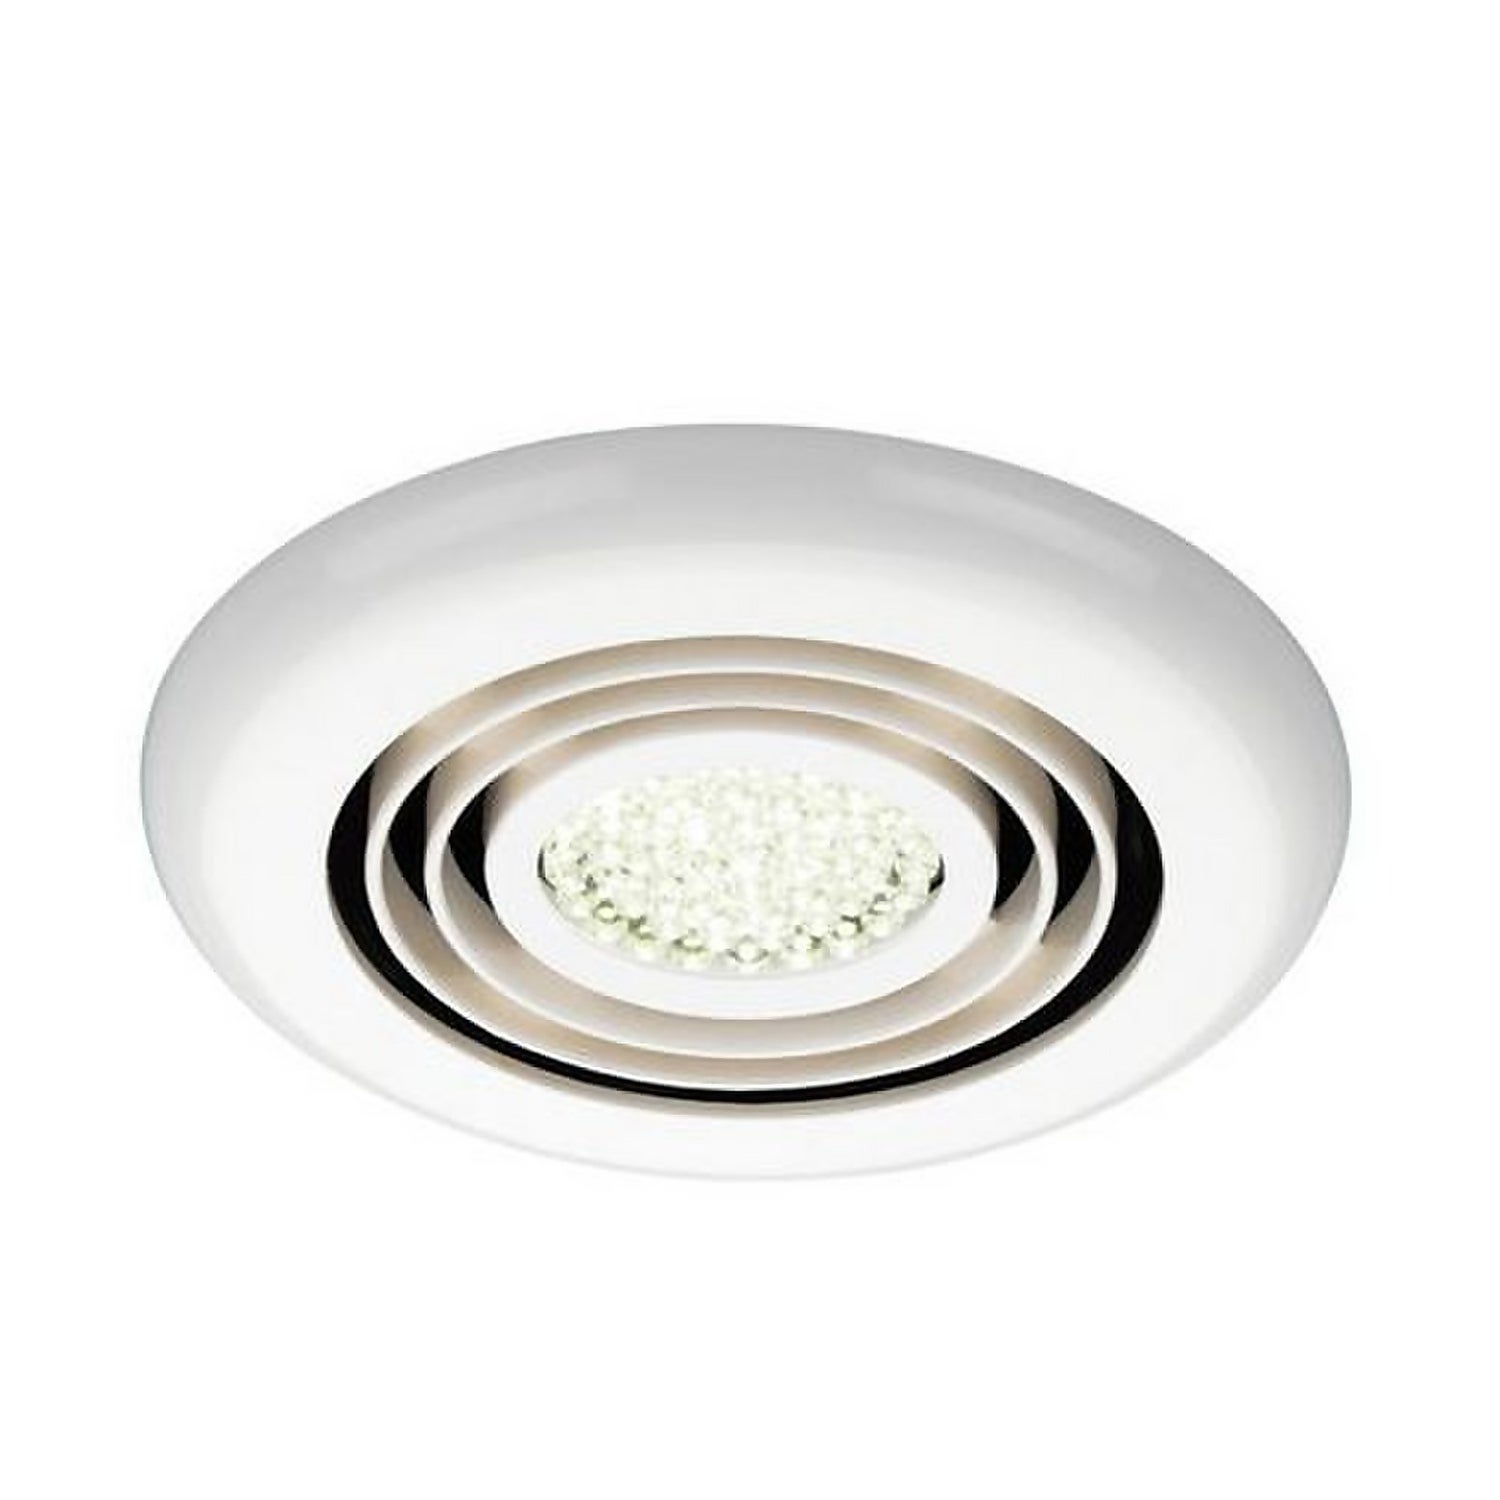 Rapide Inline Wet Room Bathroom Extractor Fan with LED lighting - White